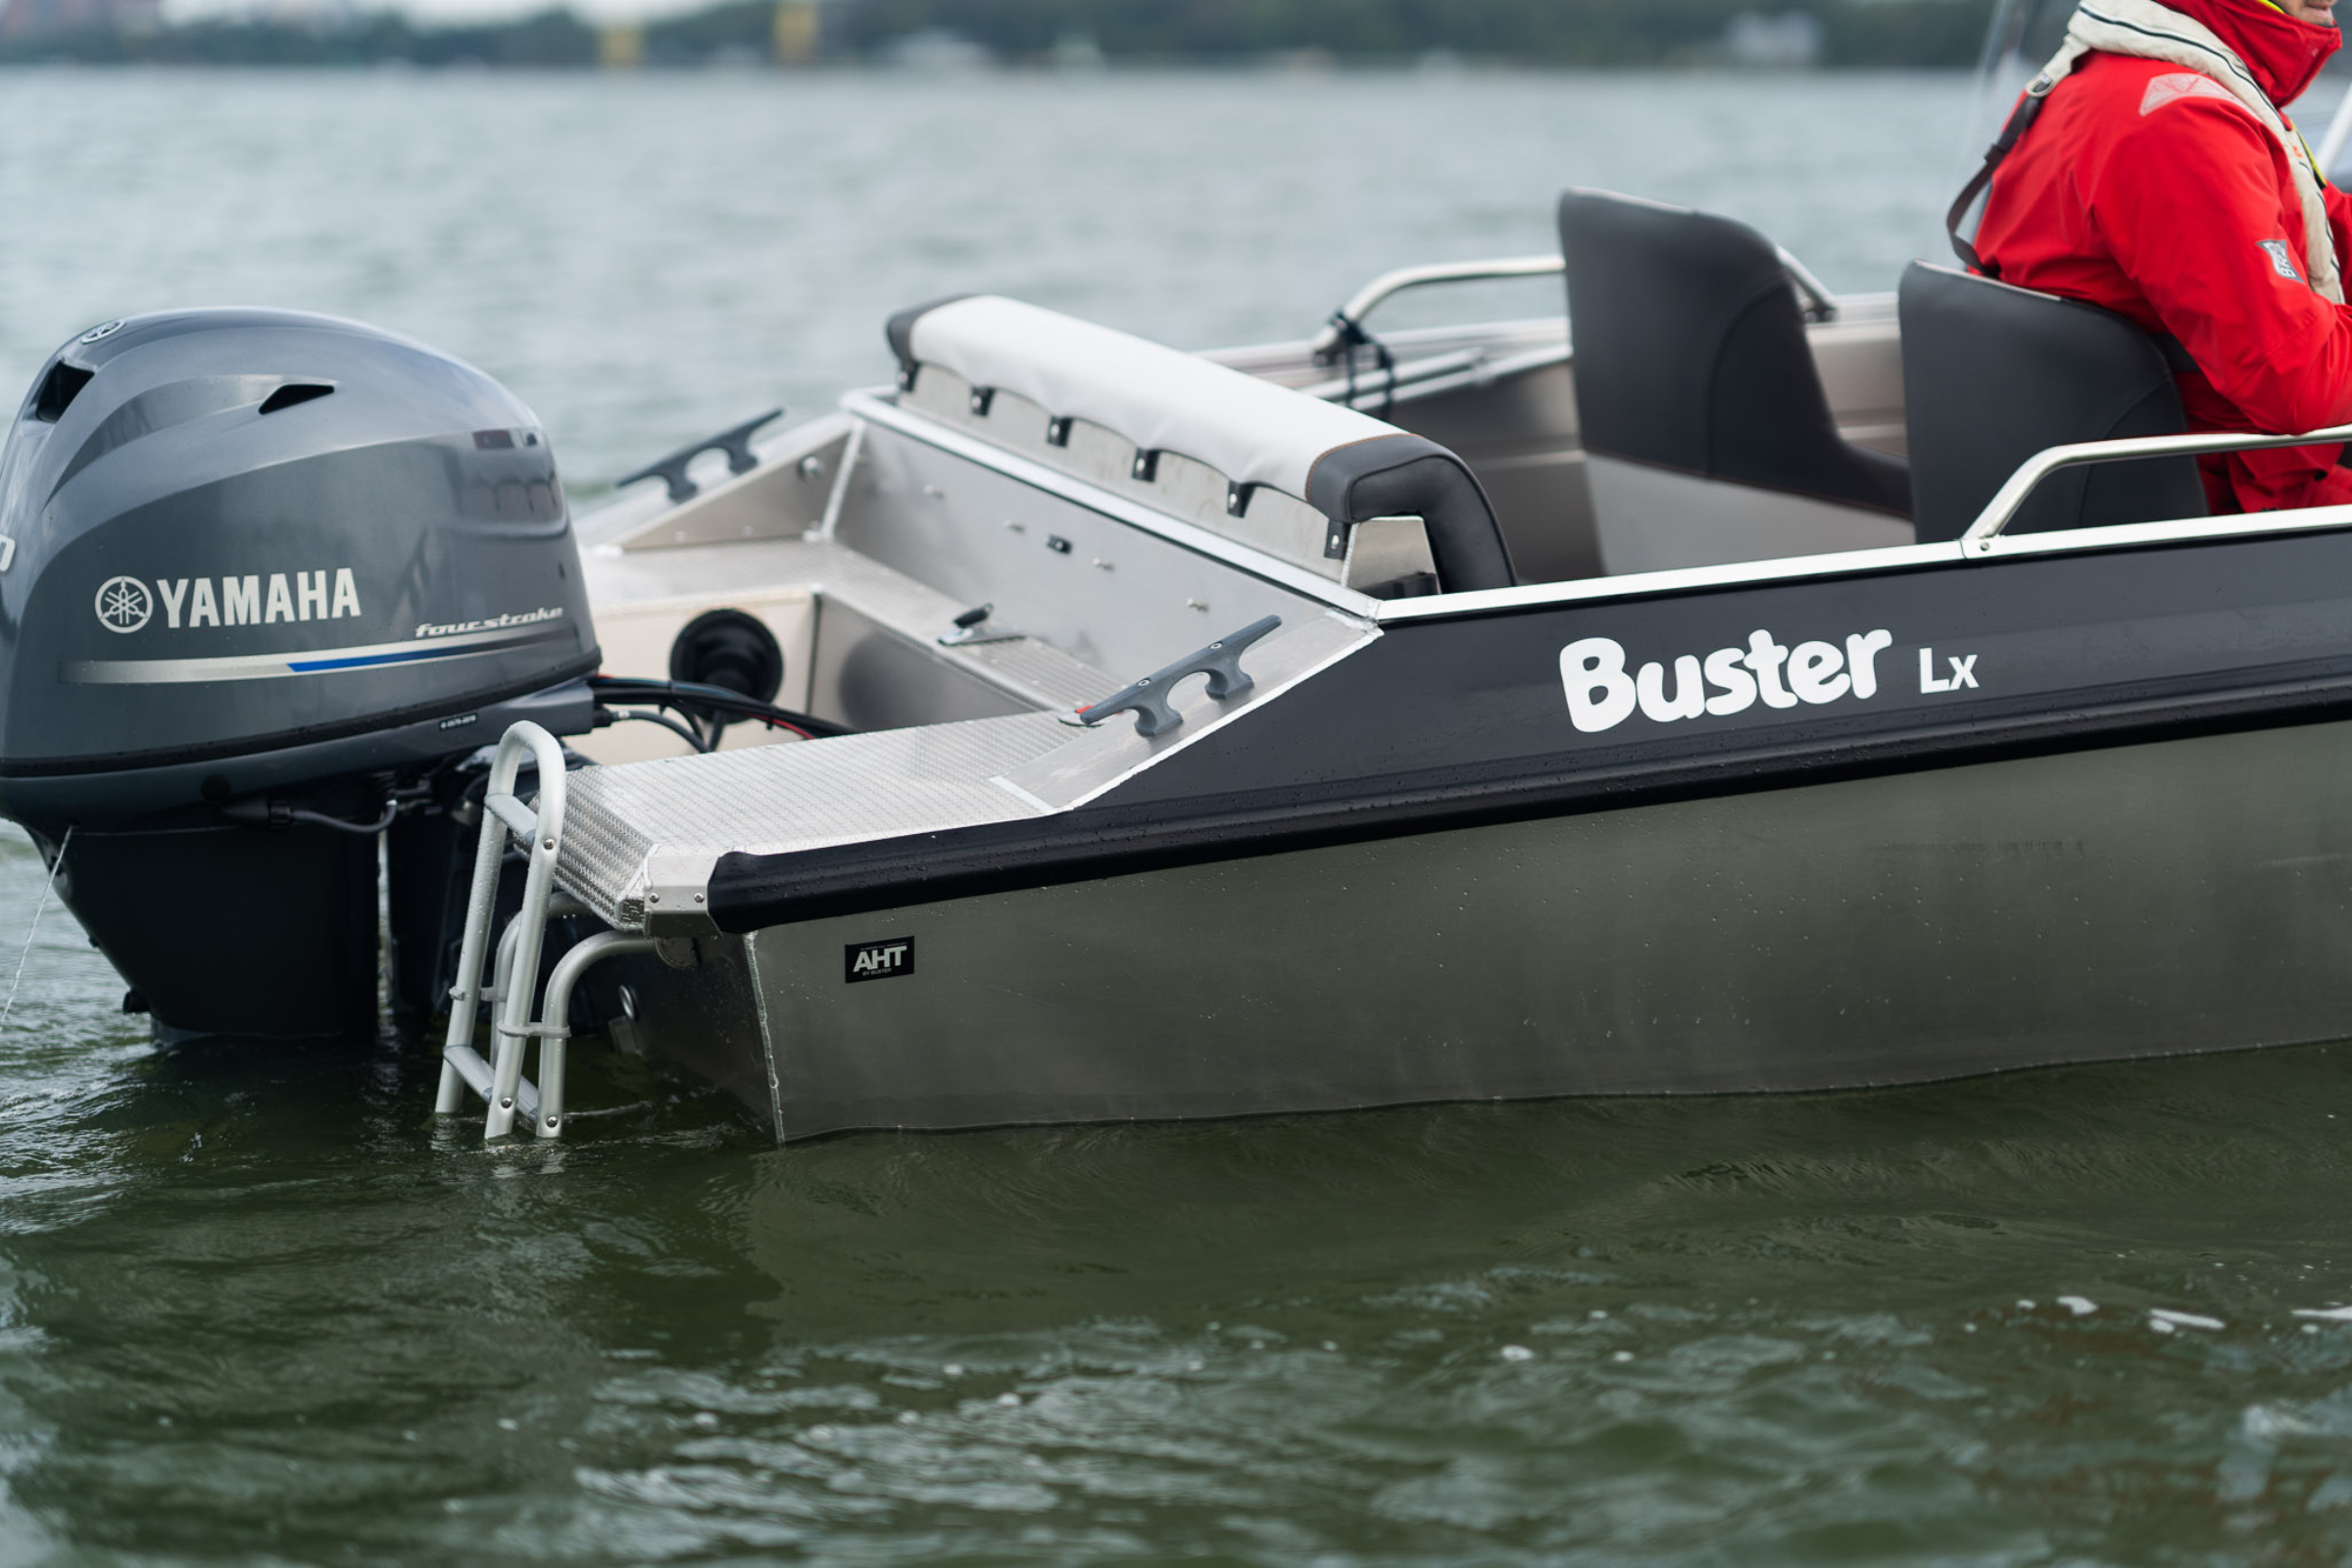 Buster Lx